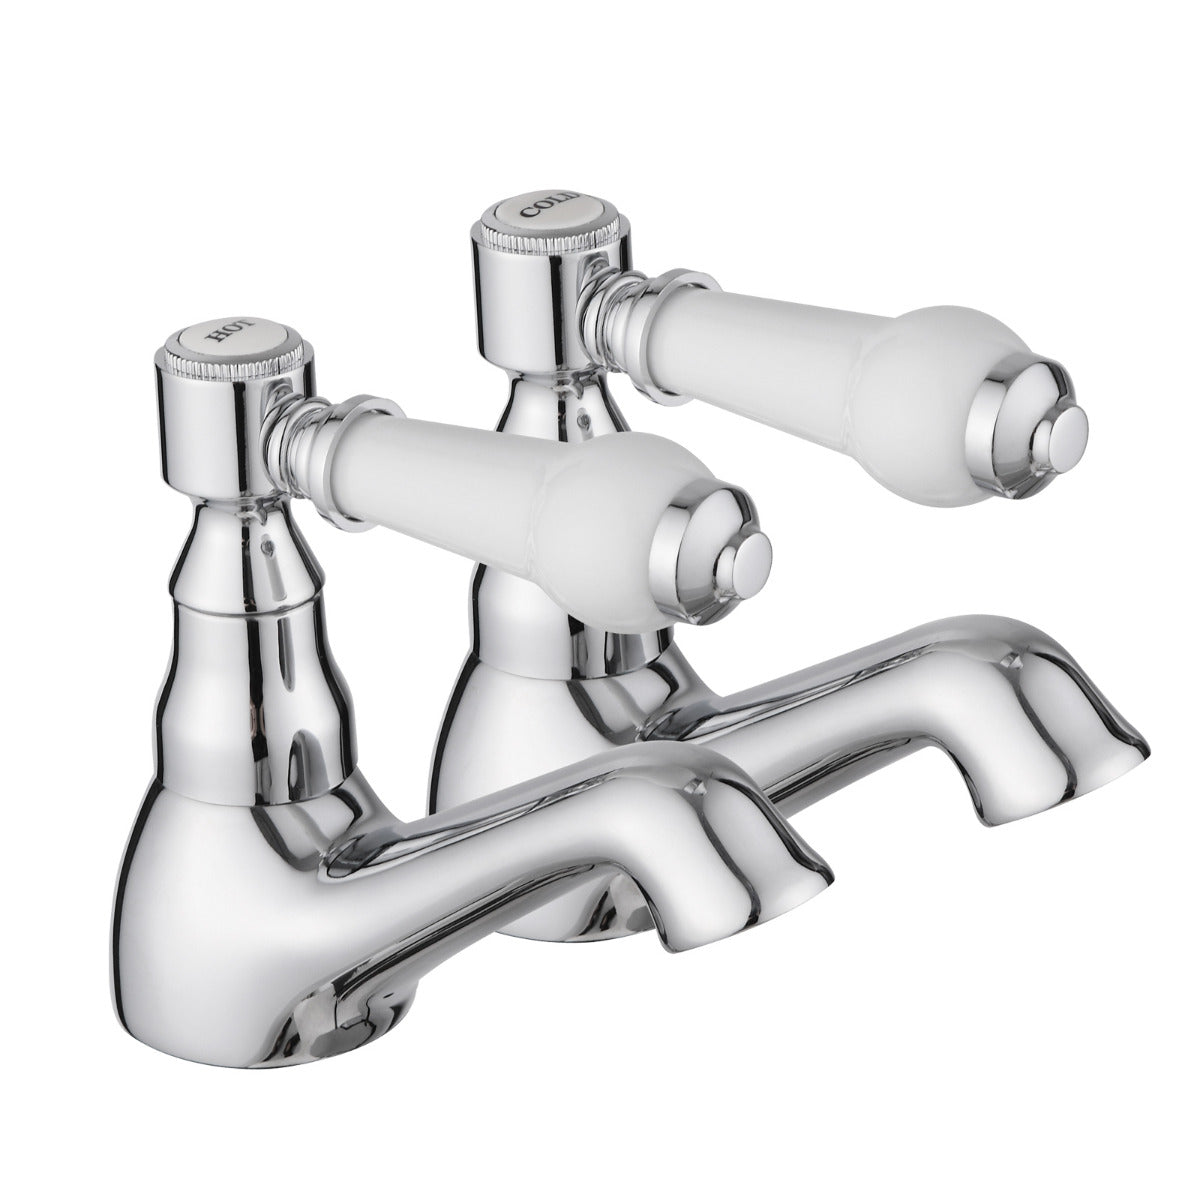 JassferryJASSFERRY Pair of Basin Taps Hot and Cold Water Bathroom 1/4 Turn Ceramic HandleBasin Taps